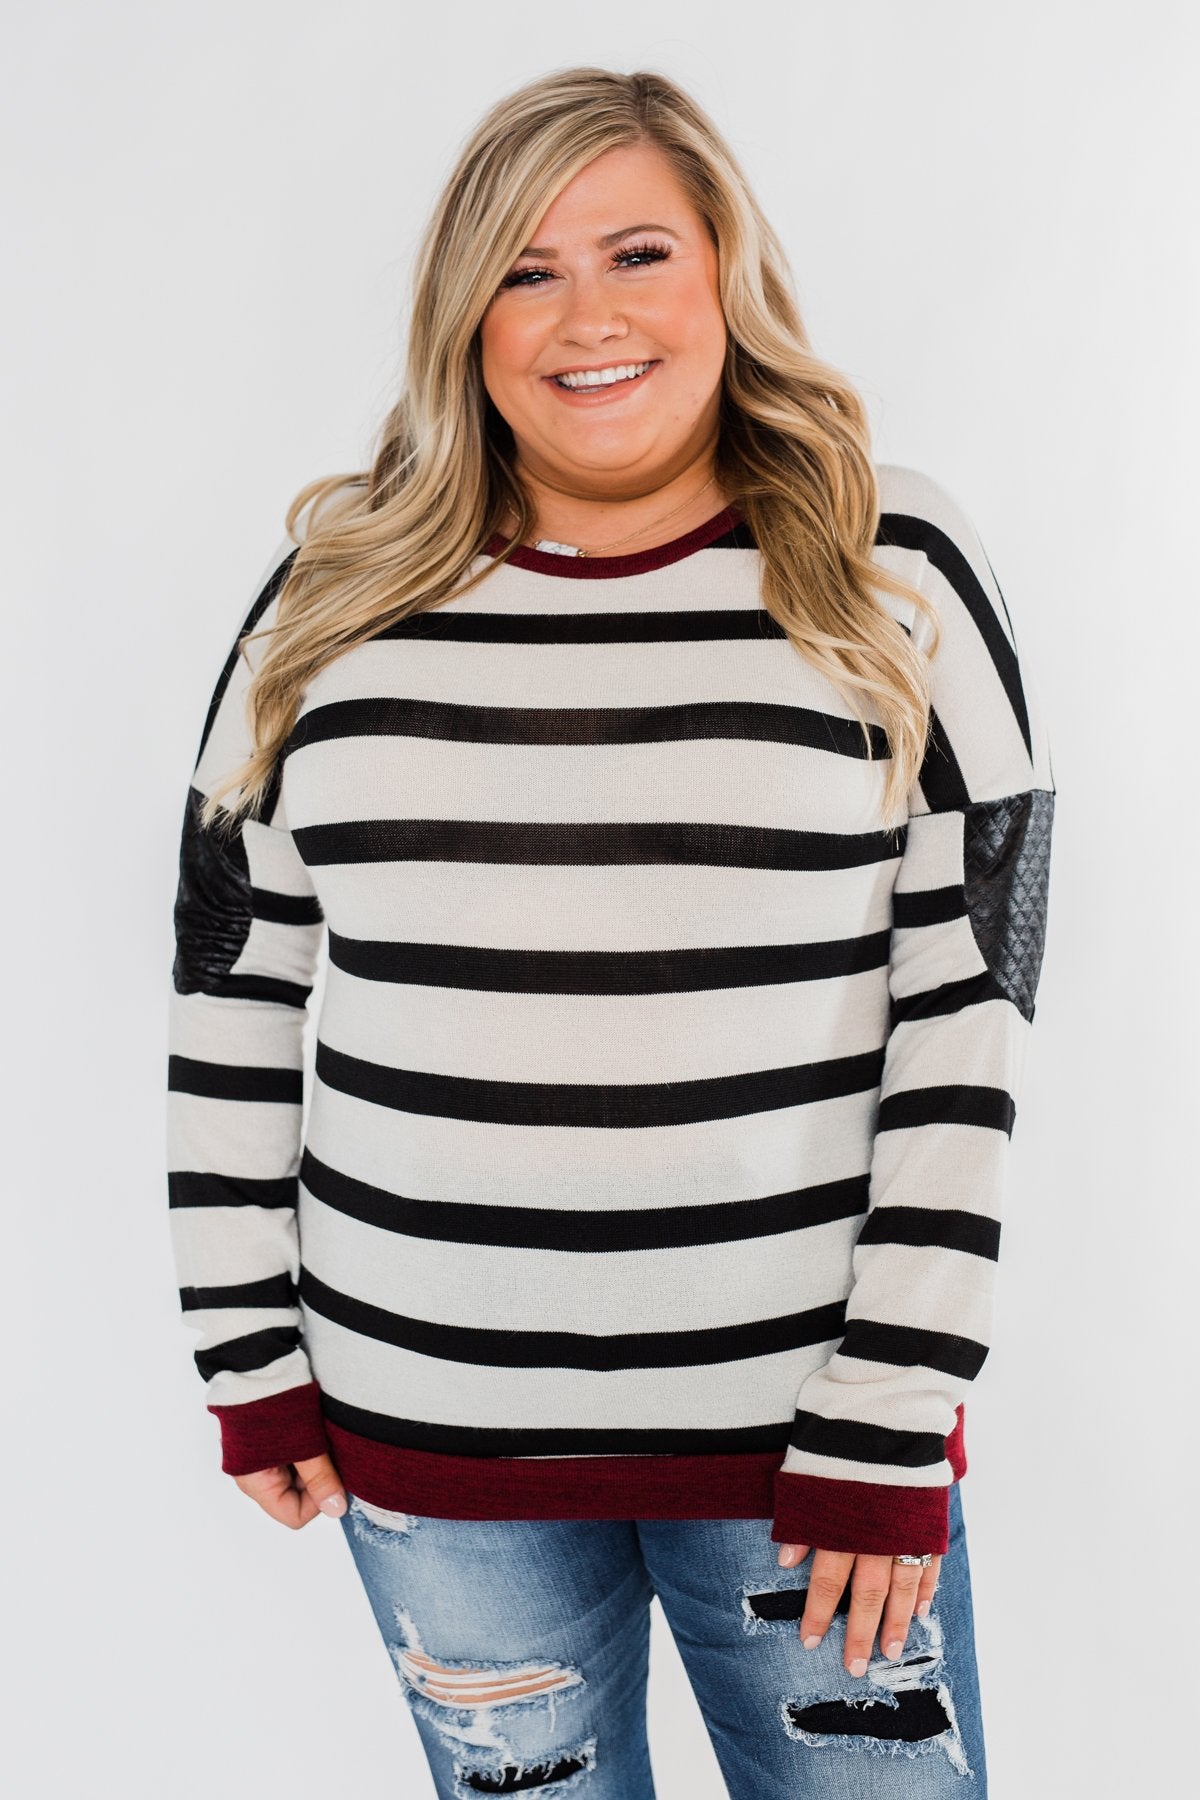 You Got it Bad Striped Top- Deep Red